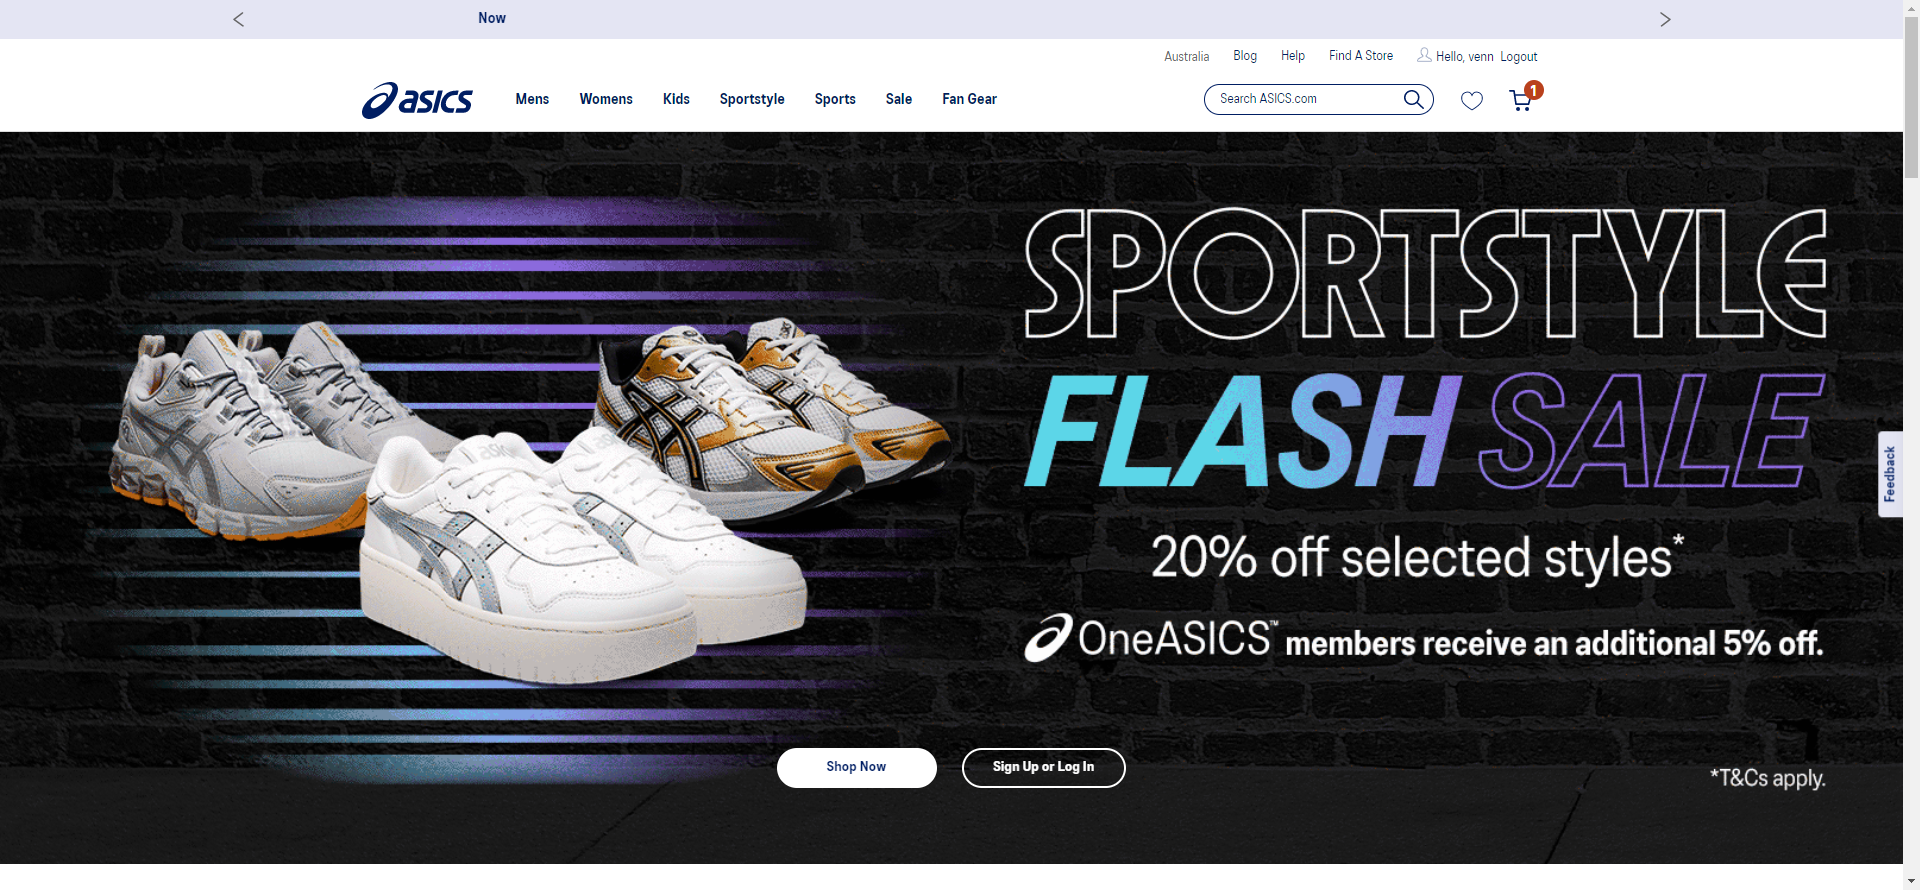 Sportstyle Shoes Up to 25% Flash Sale, GEL-QUANTUM 180 LITE-SHOW $176 (was $220) + 5% for members